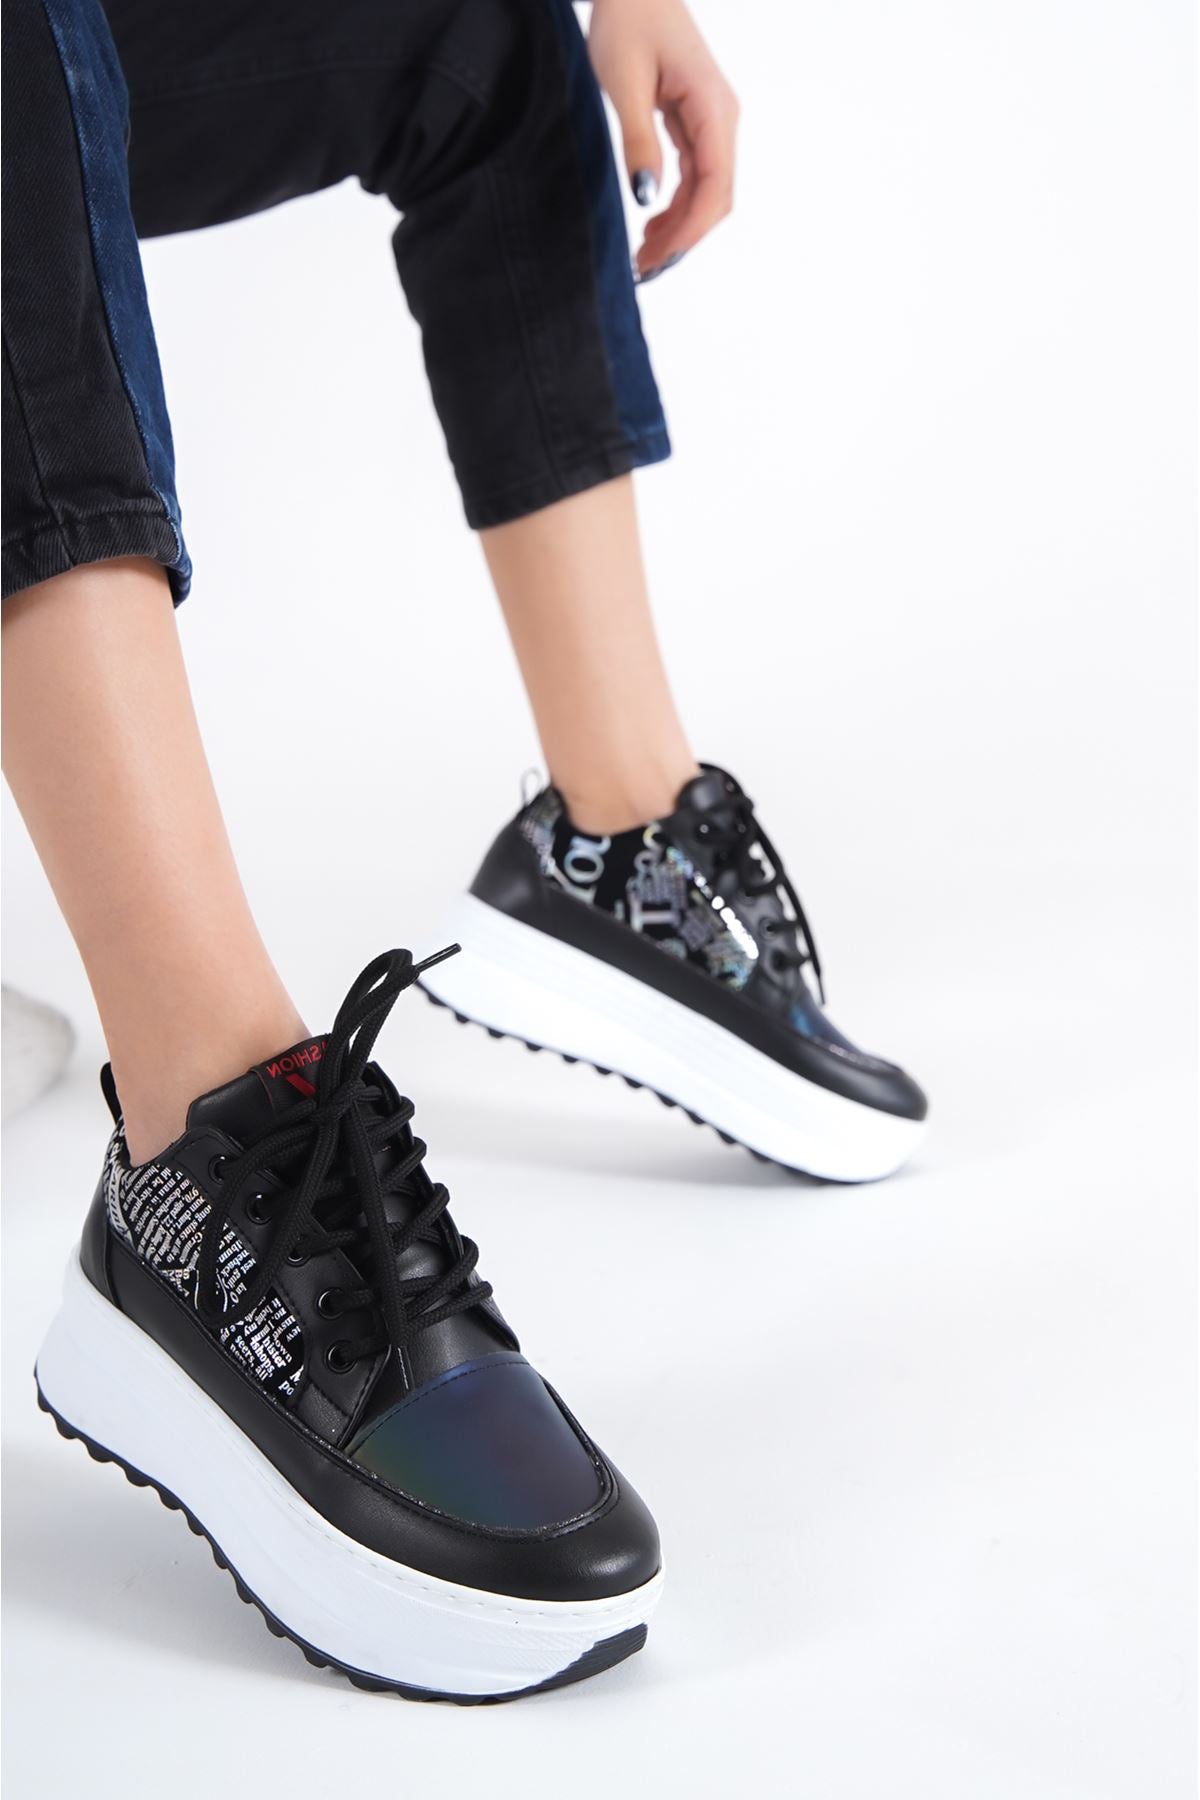 Women's ONEO black-white Sneakers Shoes - STREETMODE™